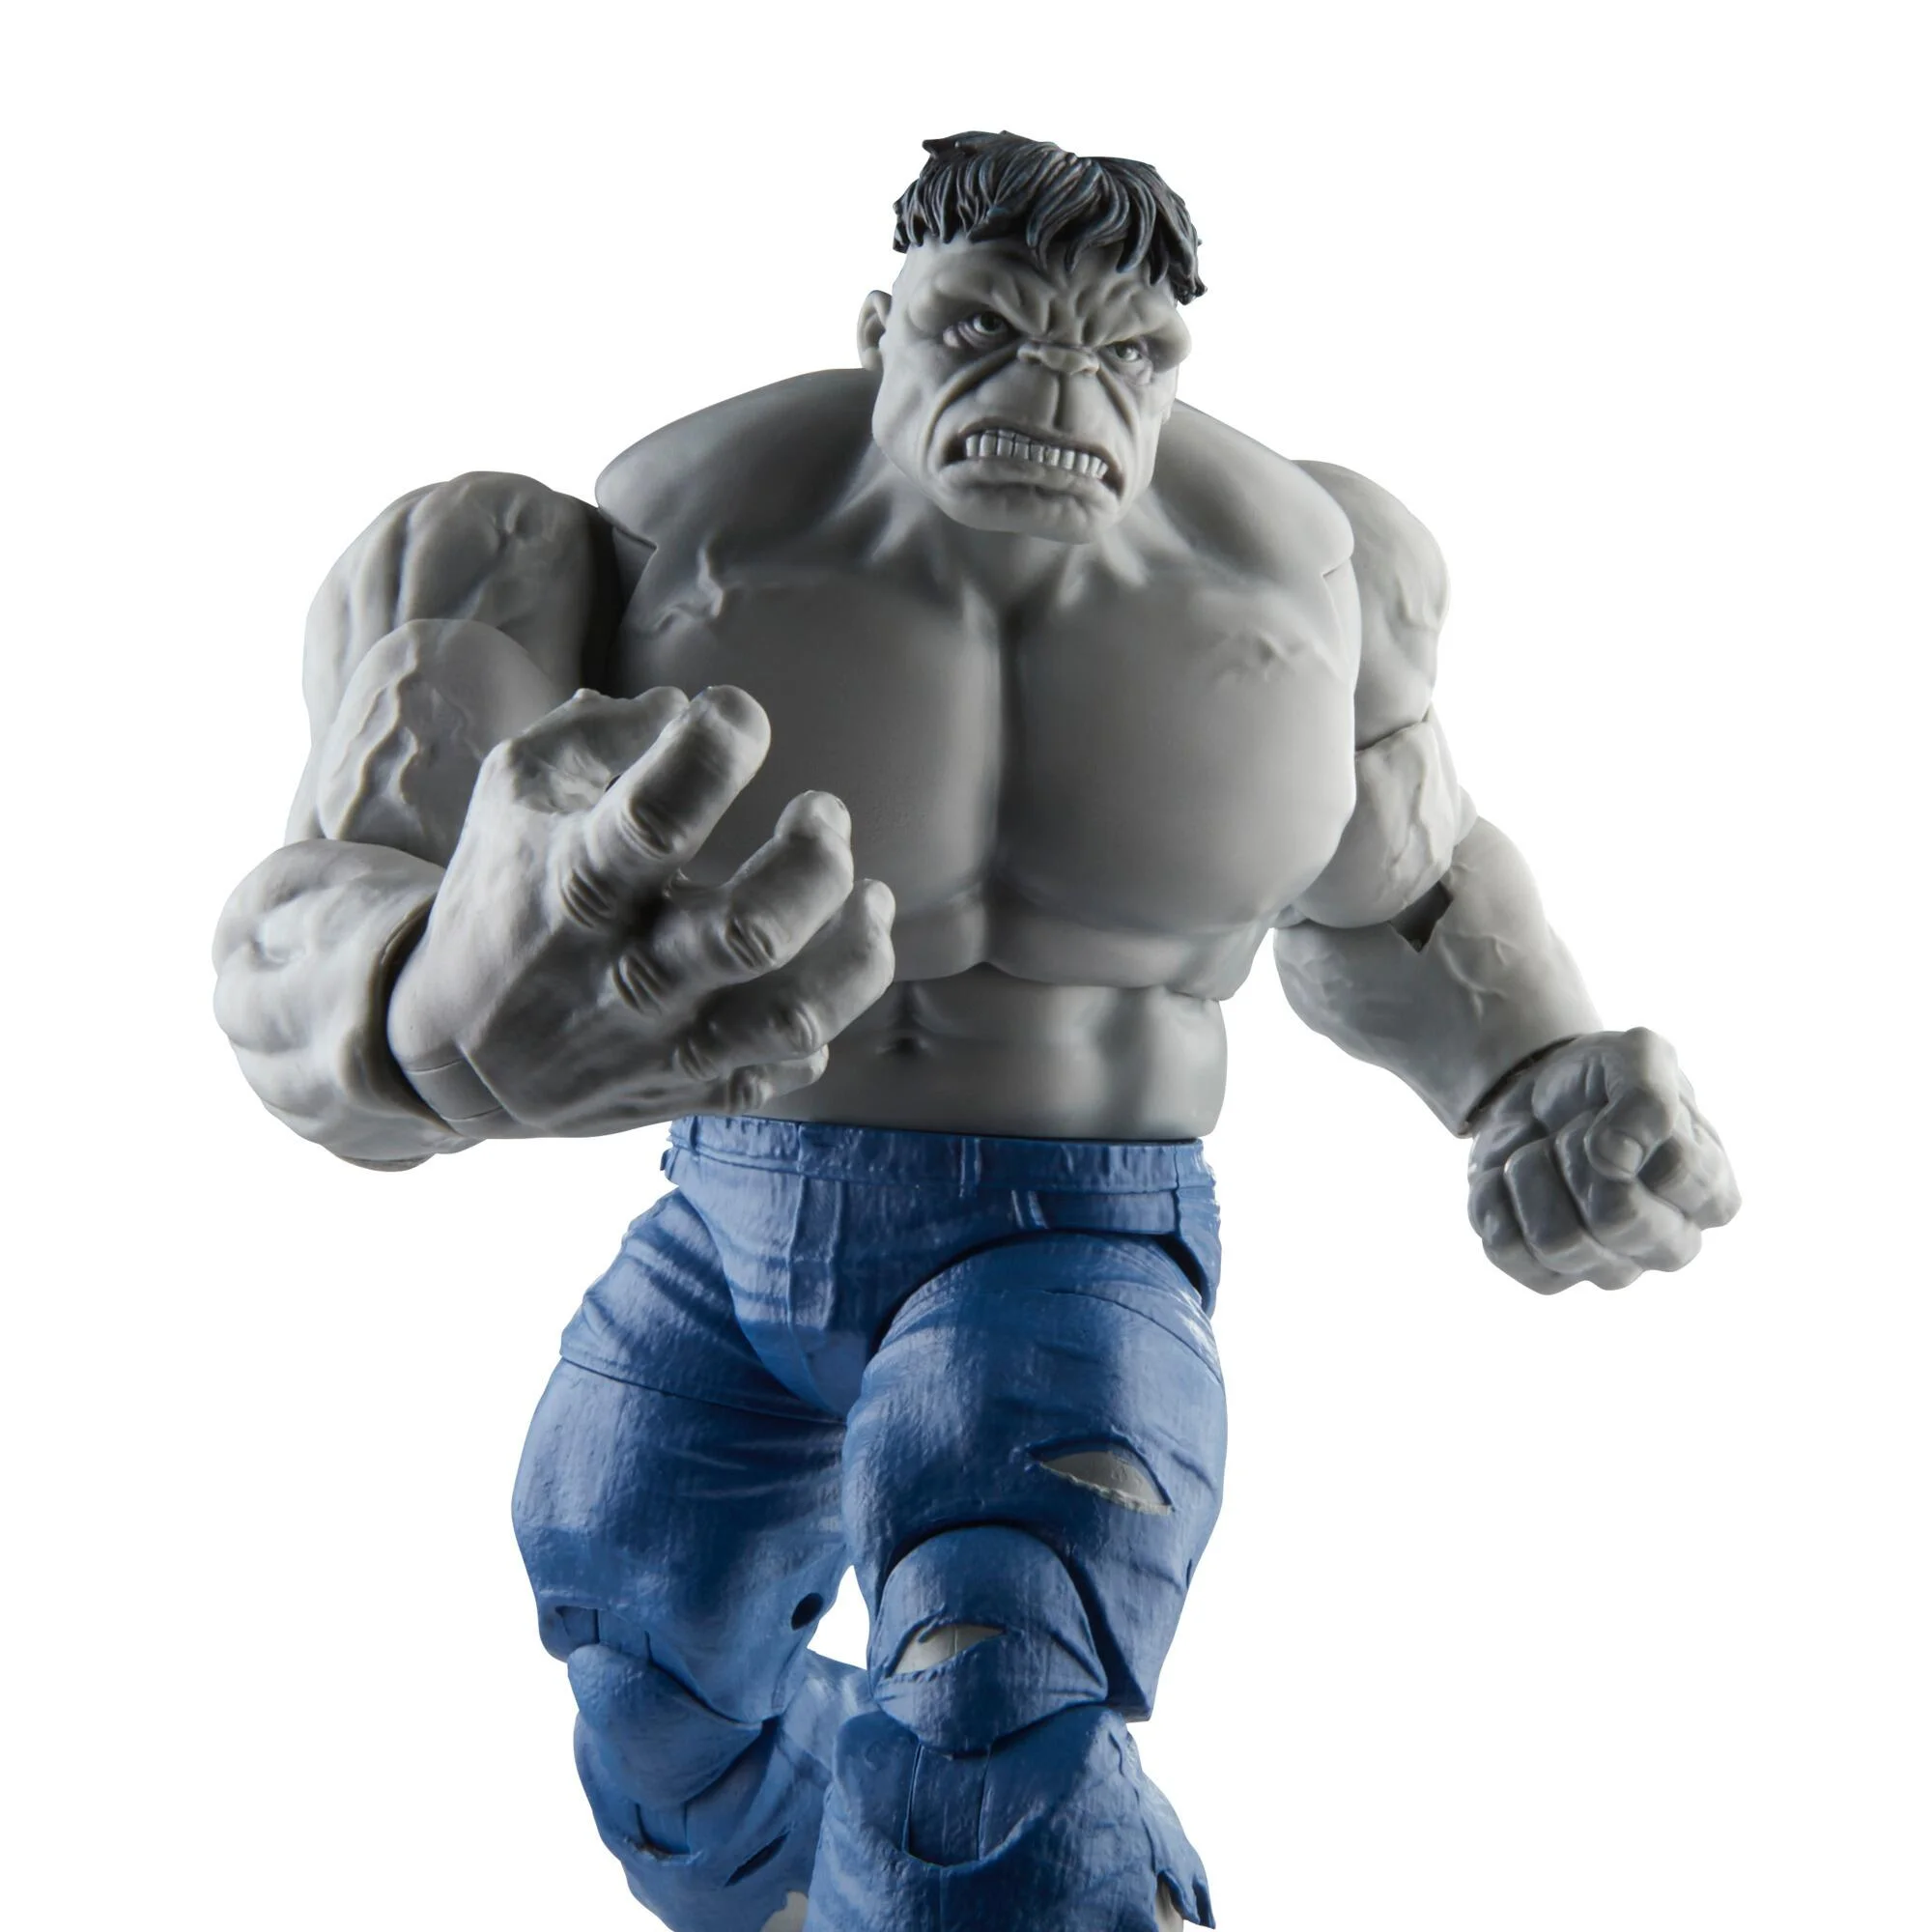 MARVEL LEGENDS SERIES 6-INCH-SCALE ACTION FIGURE 2-PACK - GRAY HULK AND DR. BRUCE BANNER